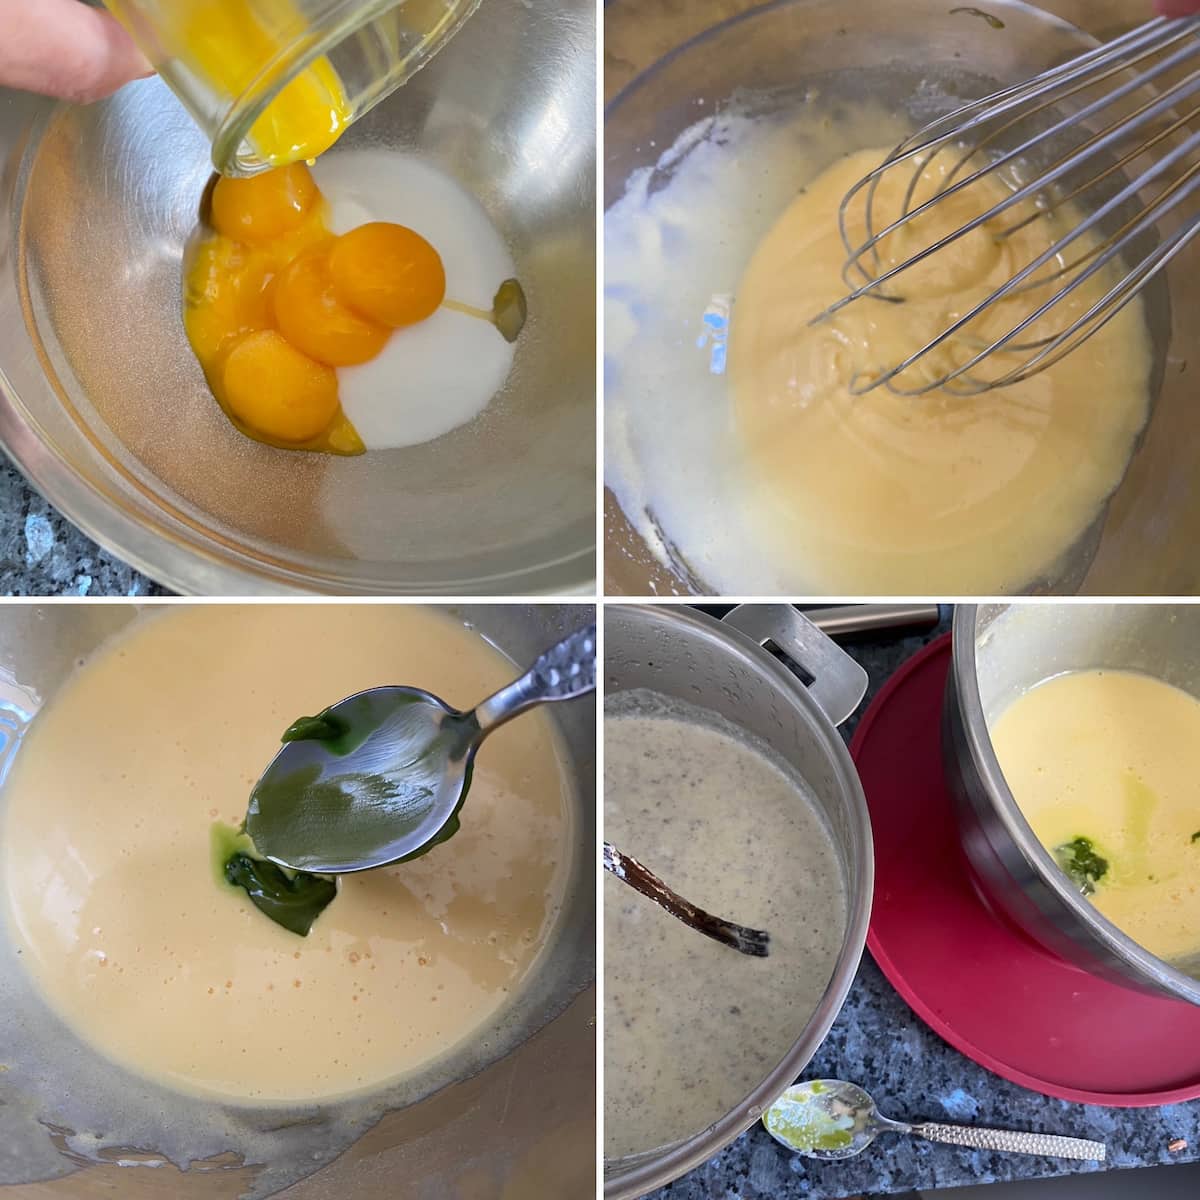 whisking up egg yolks with sugar then adding wasabi paste and tempering with the hot milk